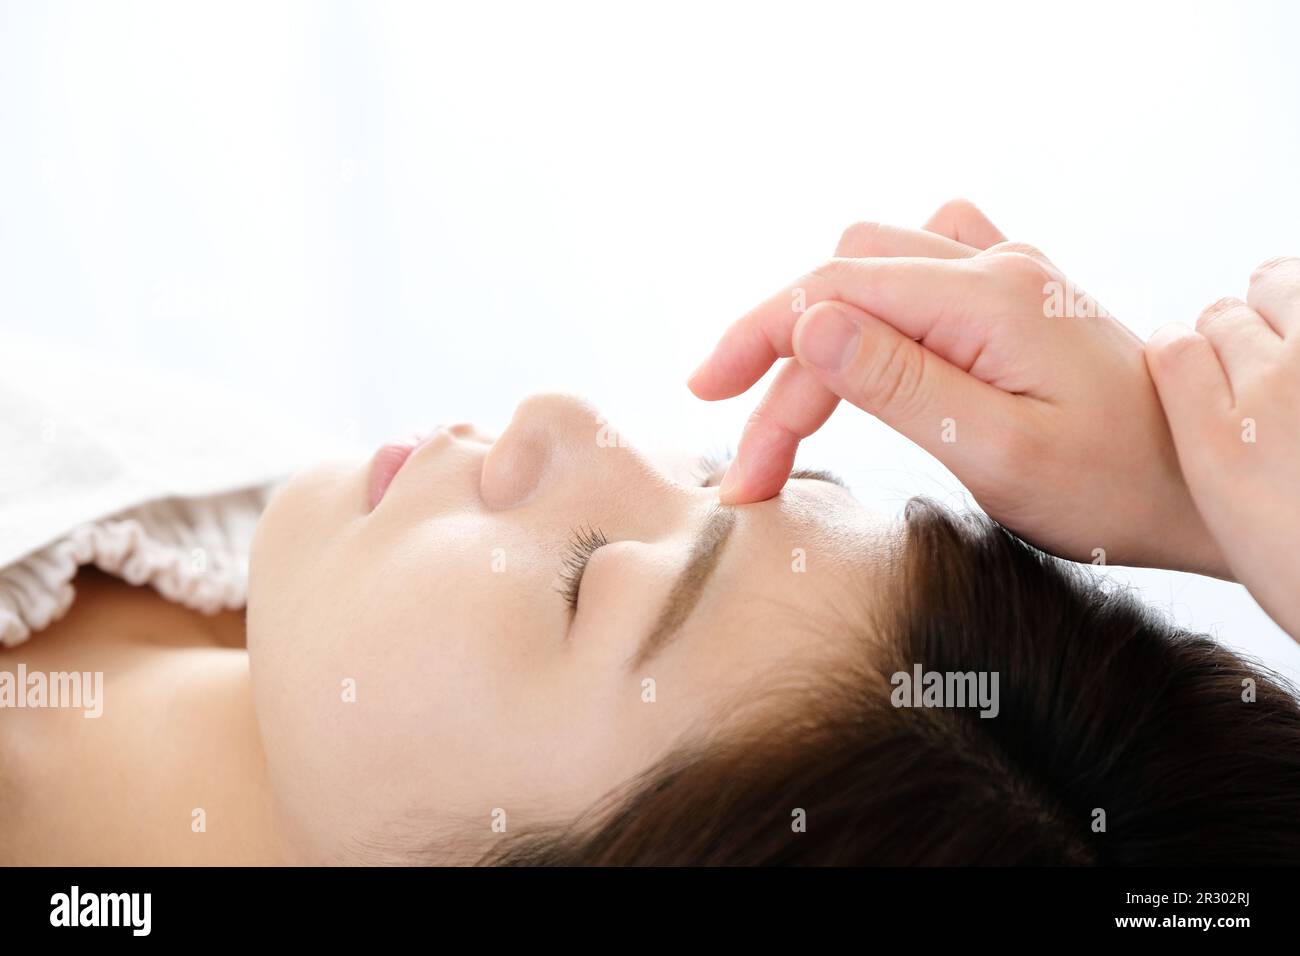 Woman receiving acupressure between the eyes at an acupuncture clinic Stock Photo